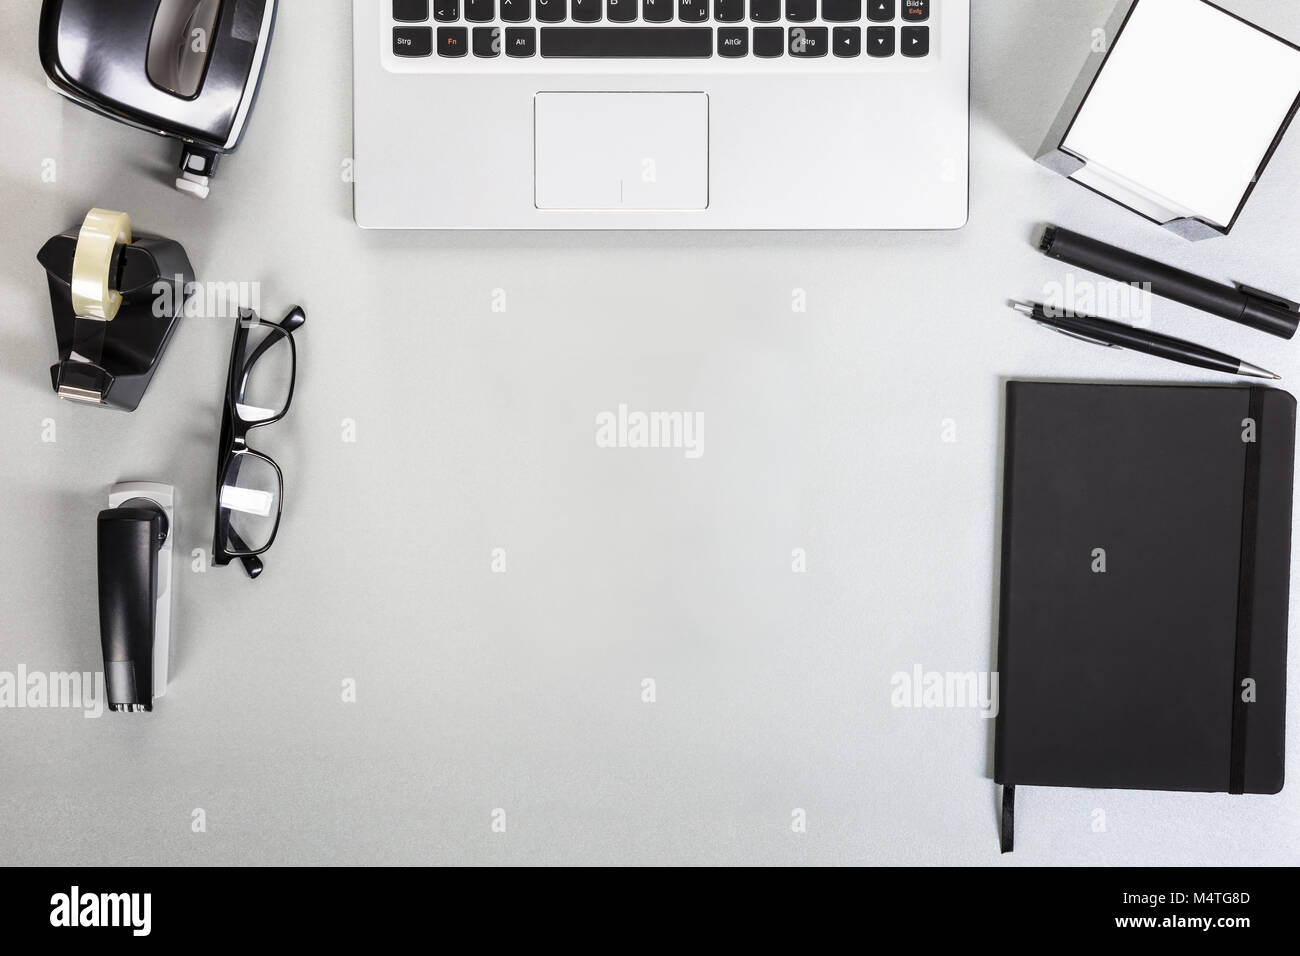 Elevated View Of A Desk With Laptop And Office Supplies Stock Photo